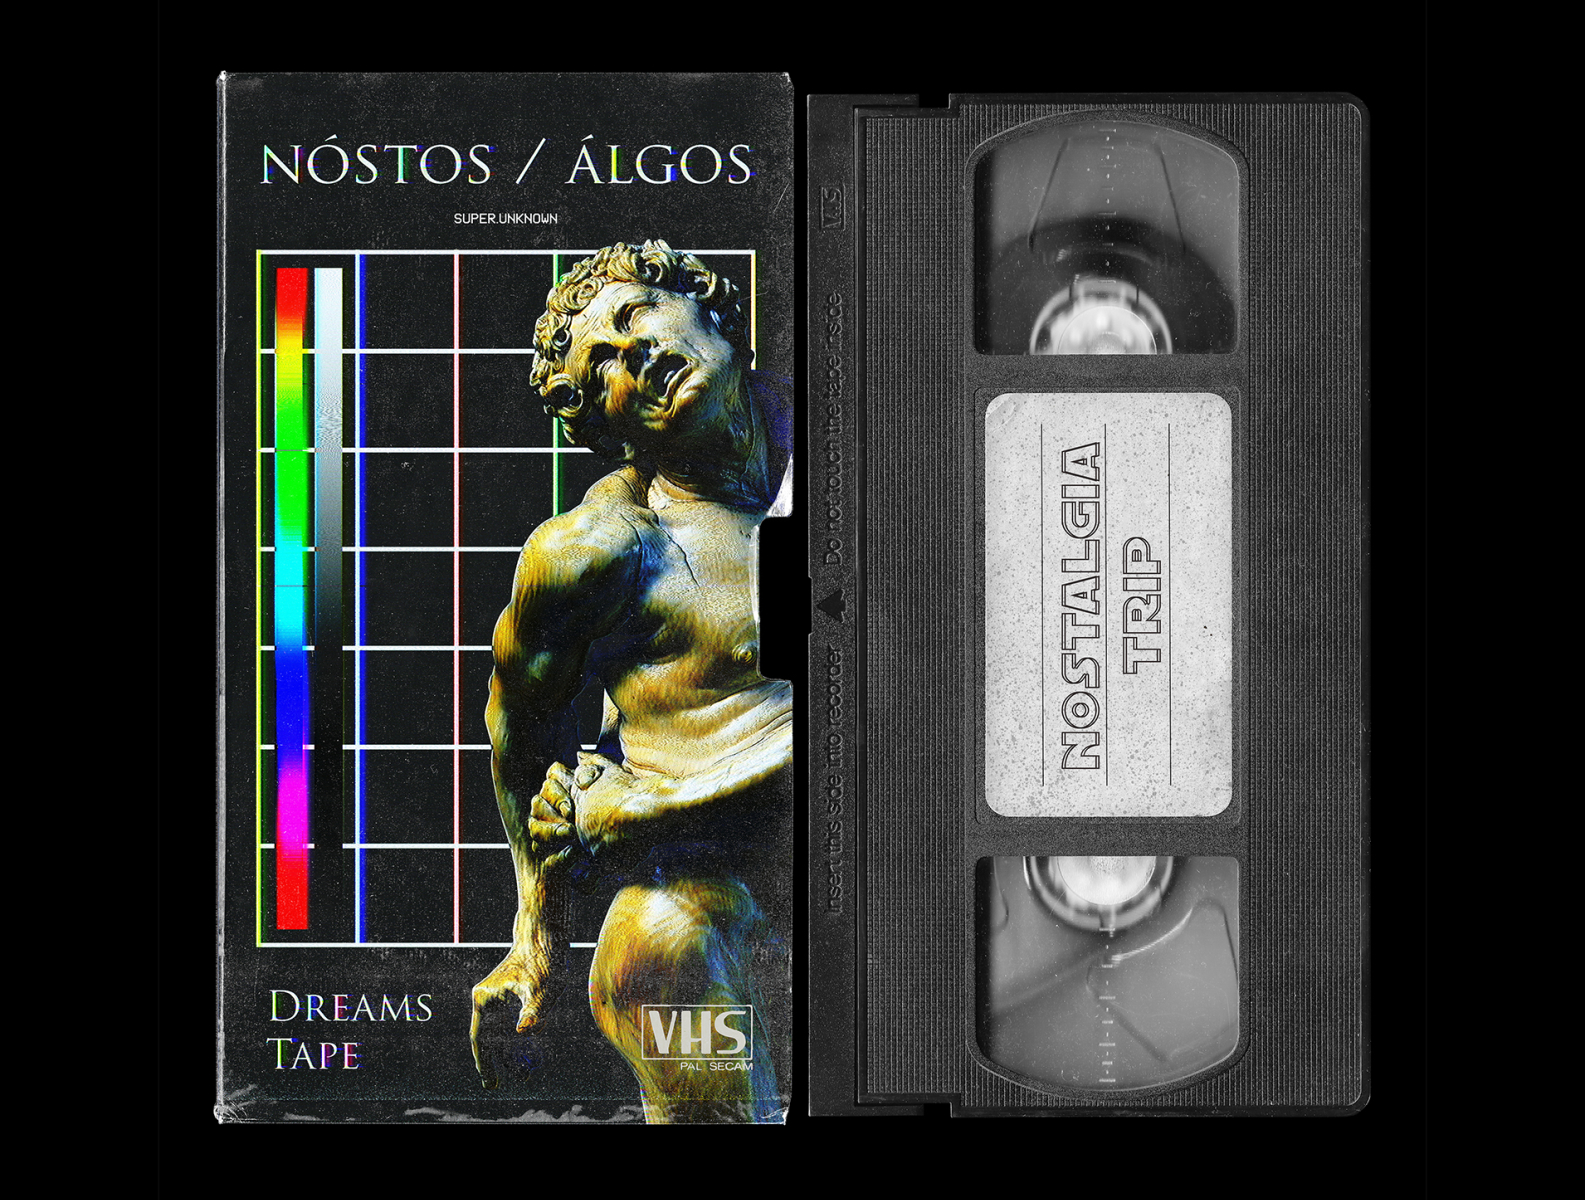 VHS Tape and Cover Mockup by Dominik Schneider on Dribbble